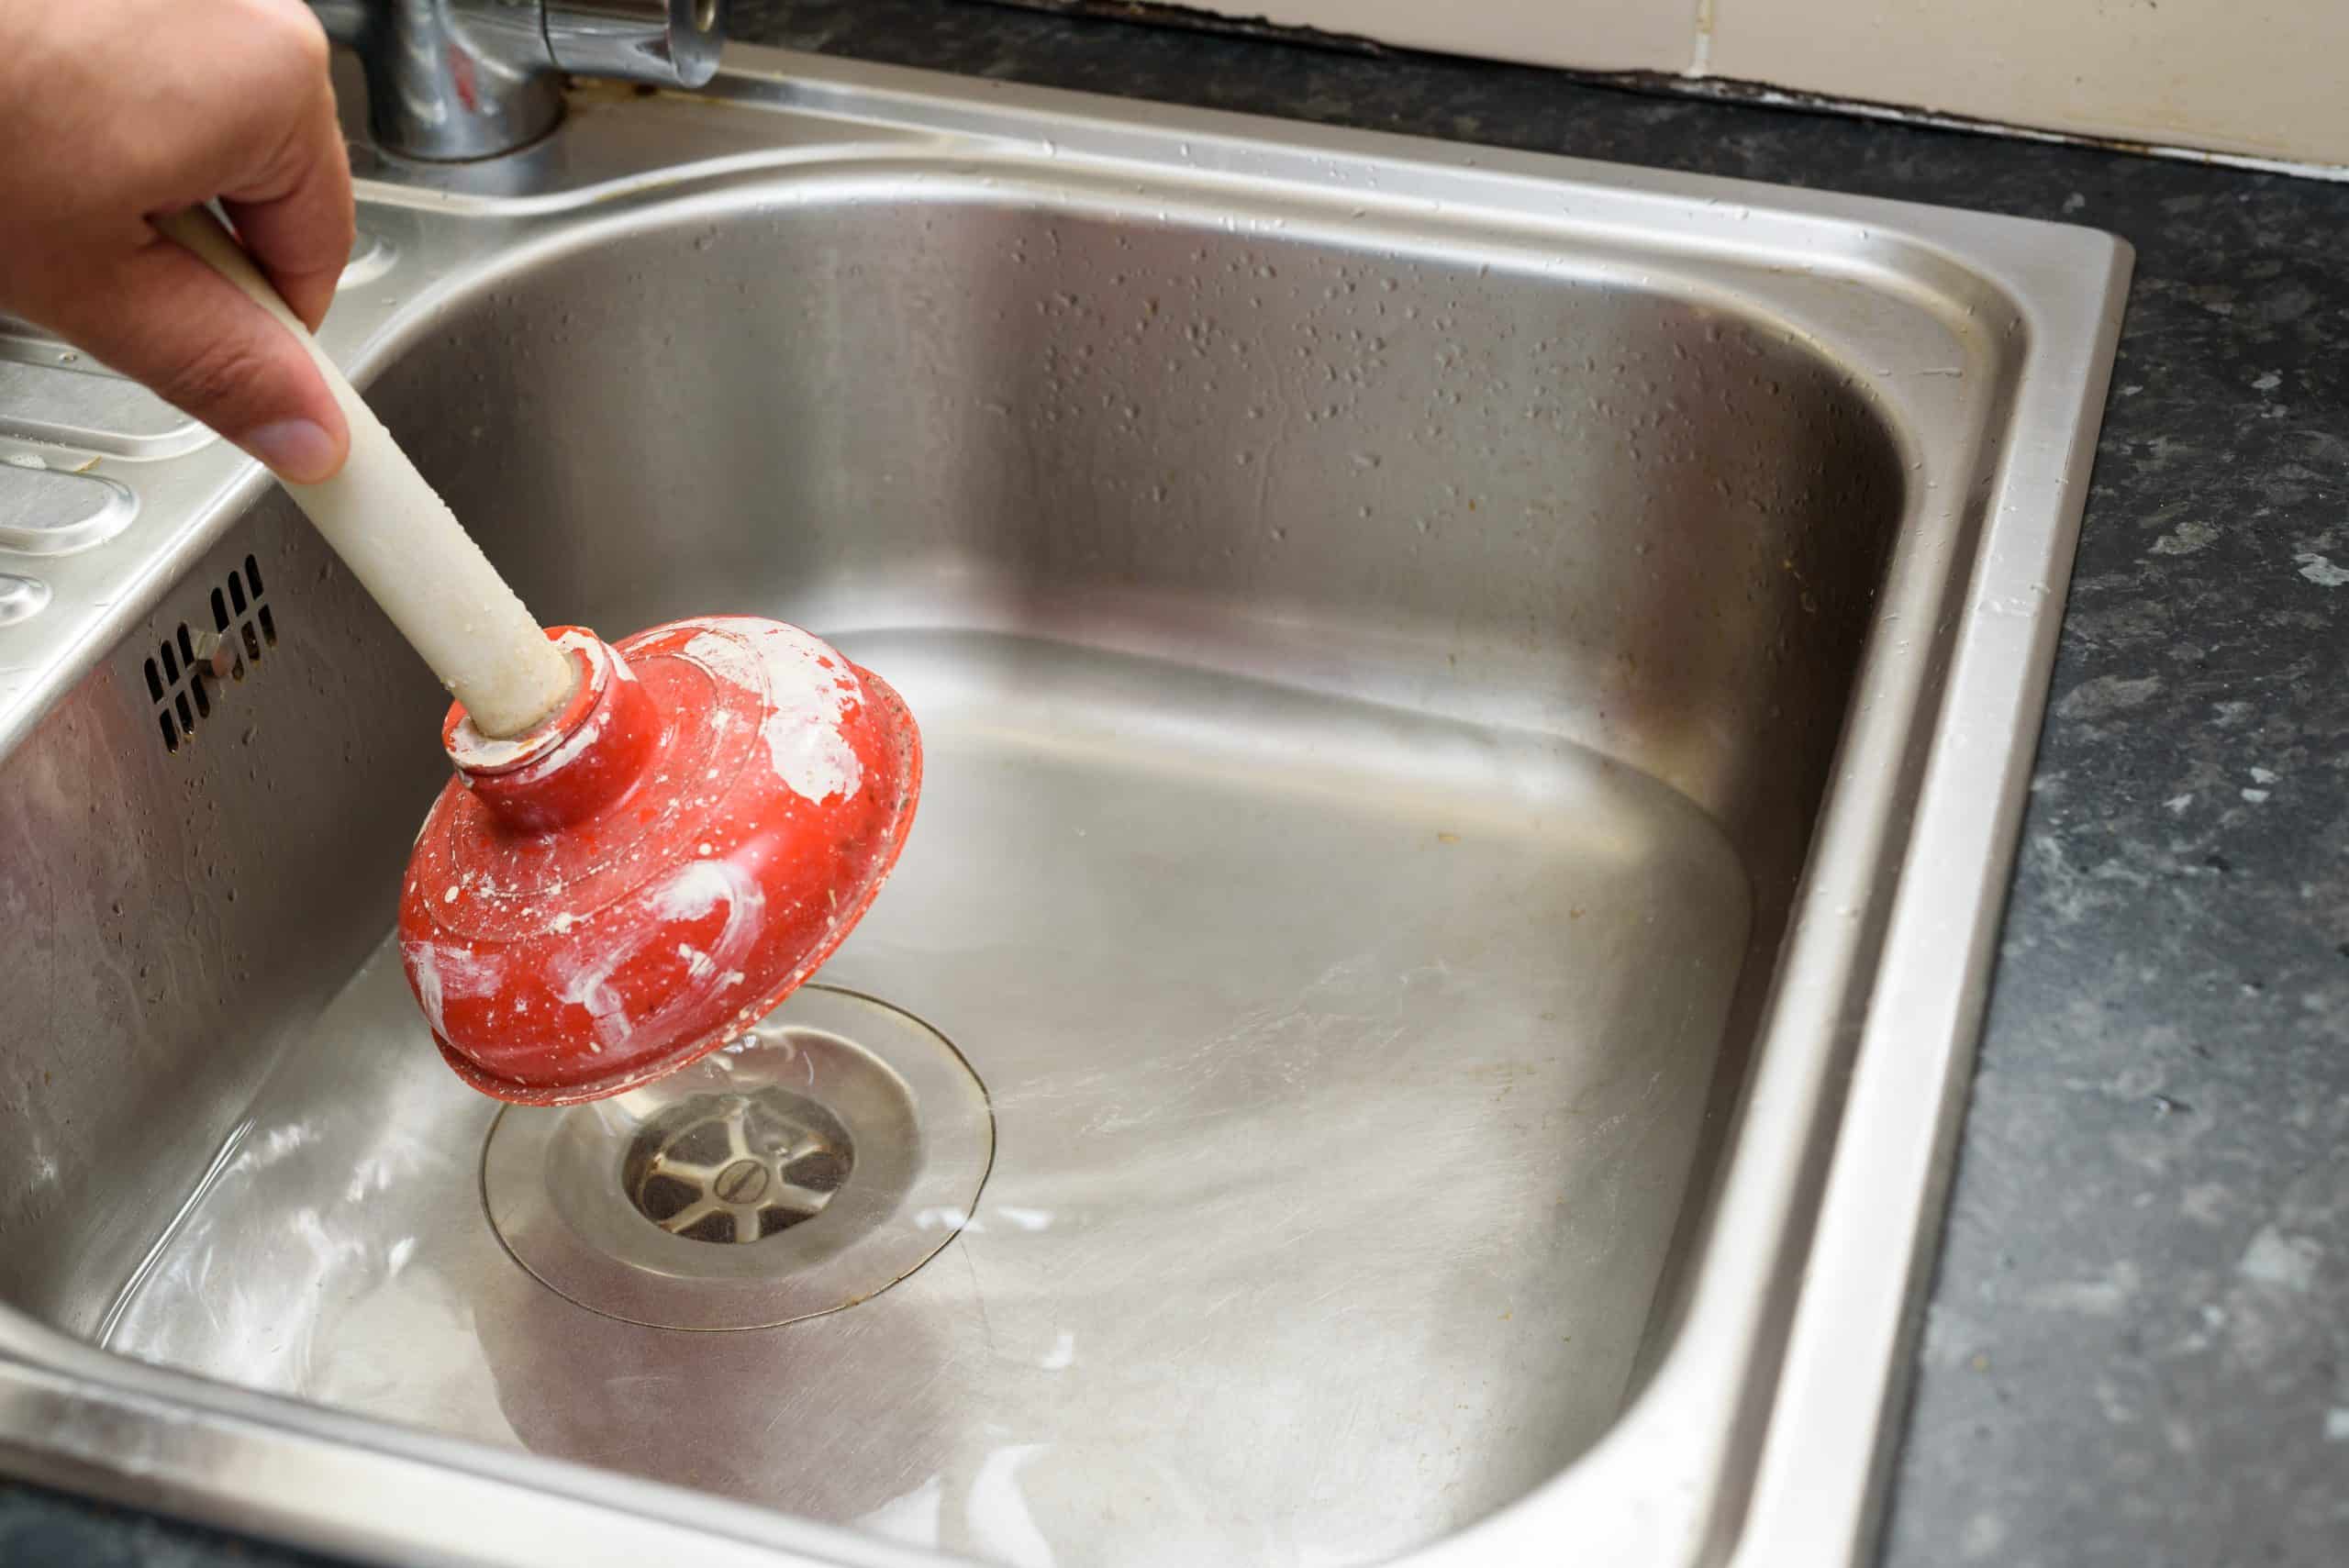 Man using a plunger with one hand to clean a clogged drain in a kitchen sink